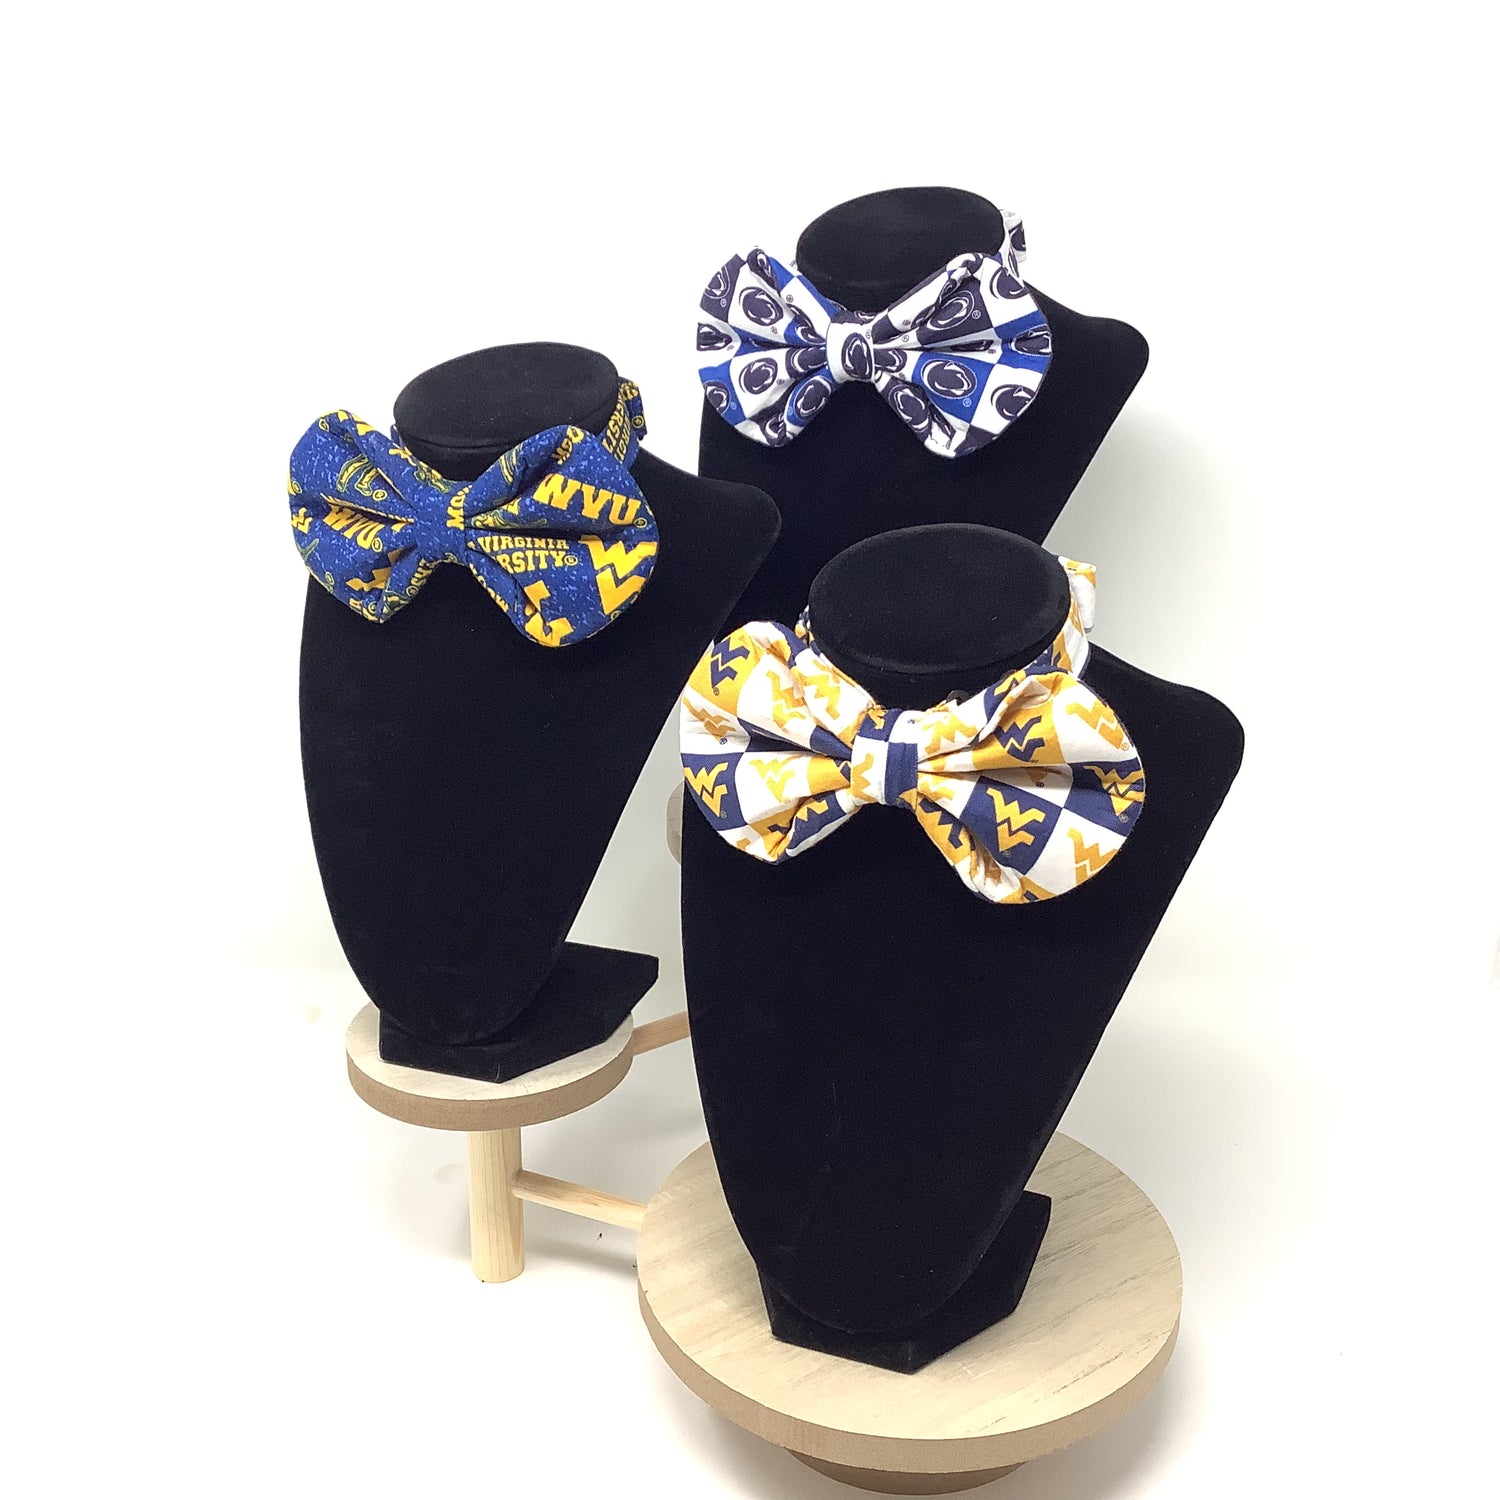 Image of Custom created bow ties by The Simple Bow